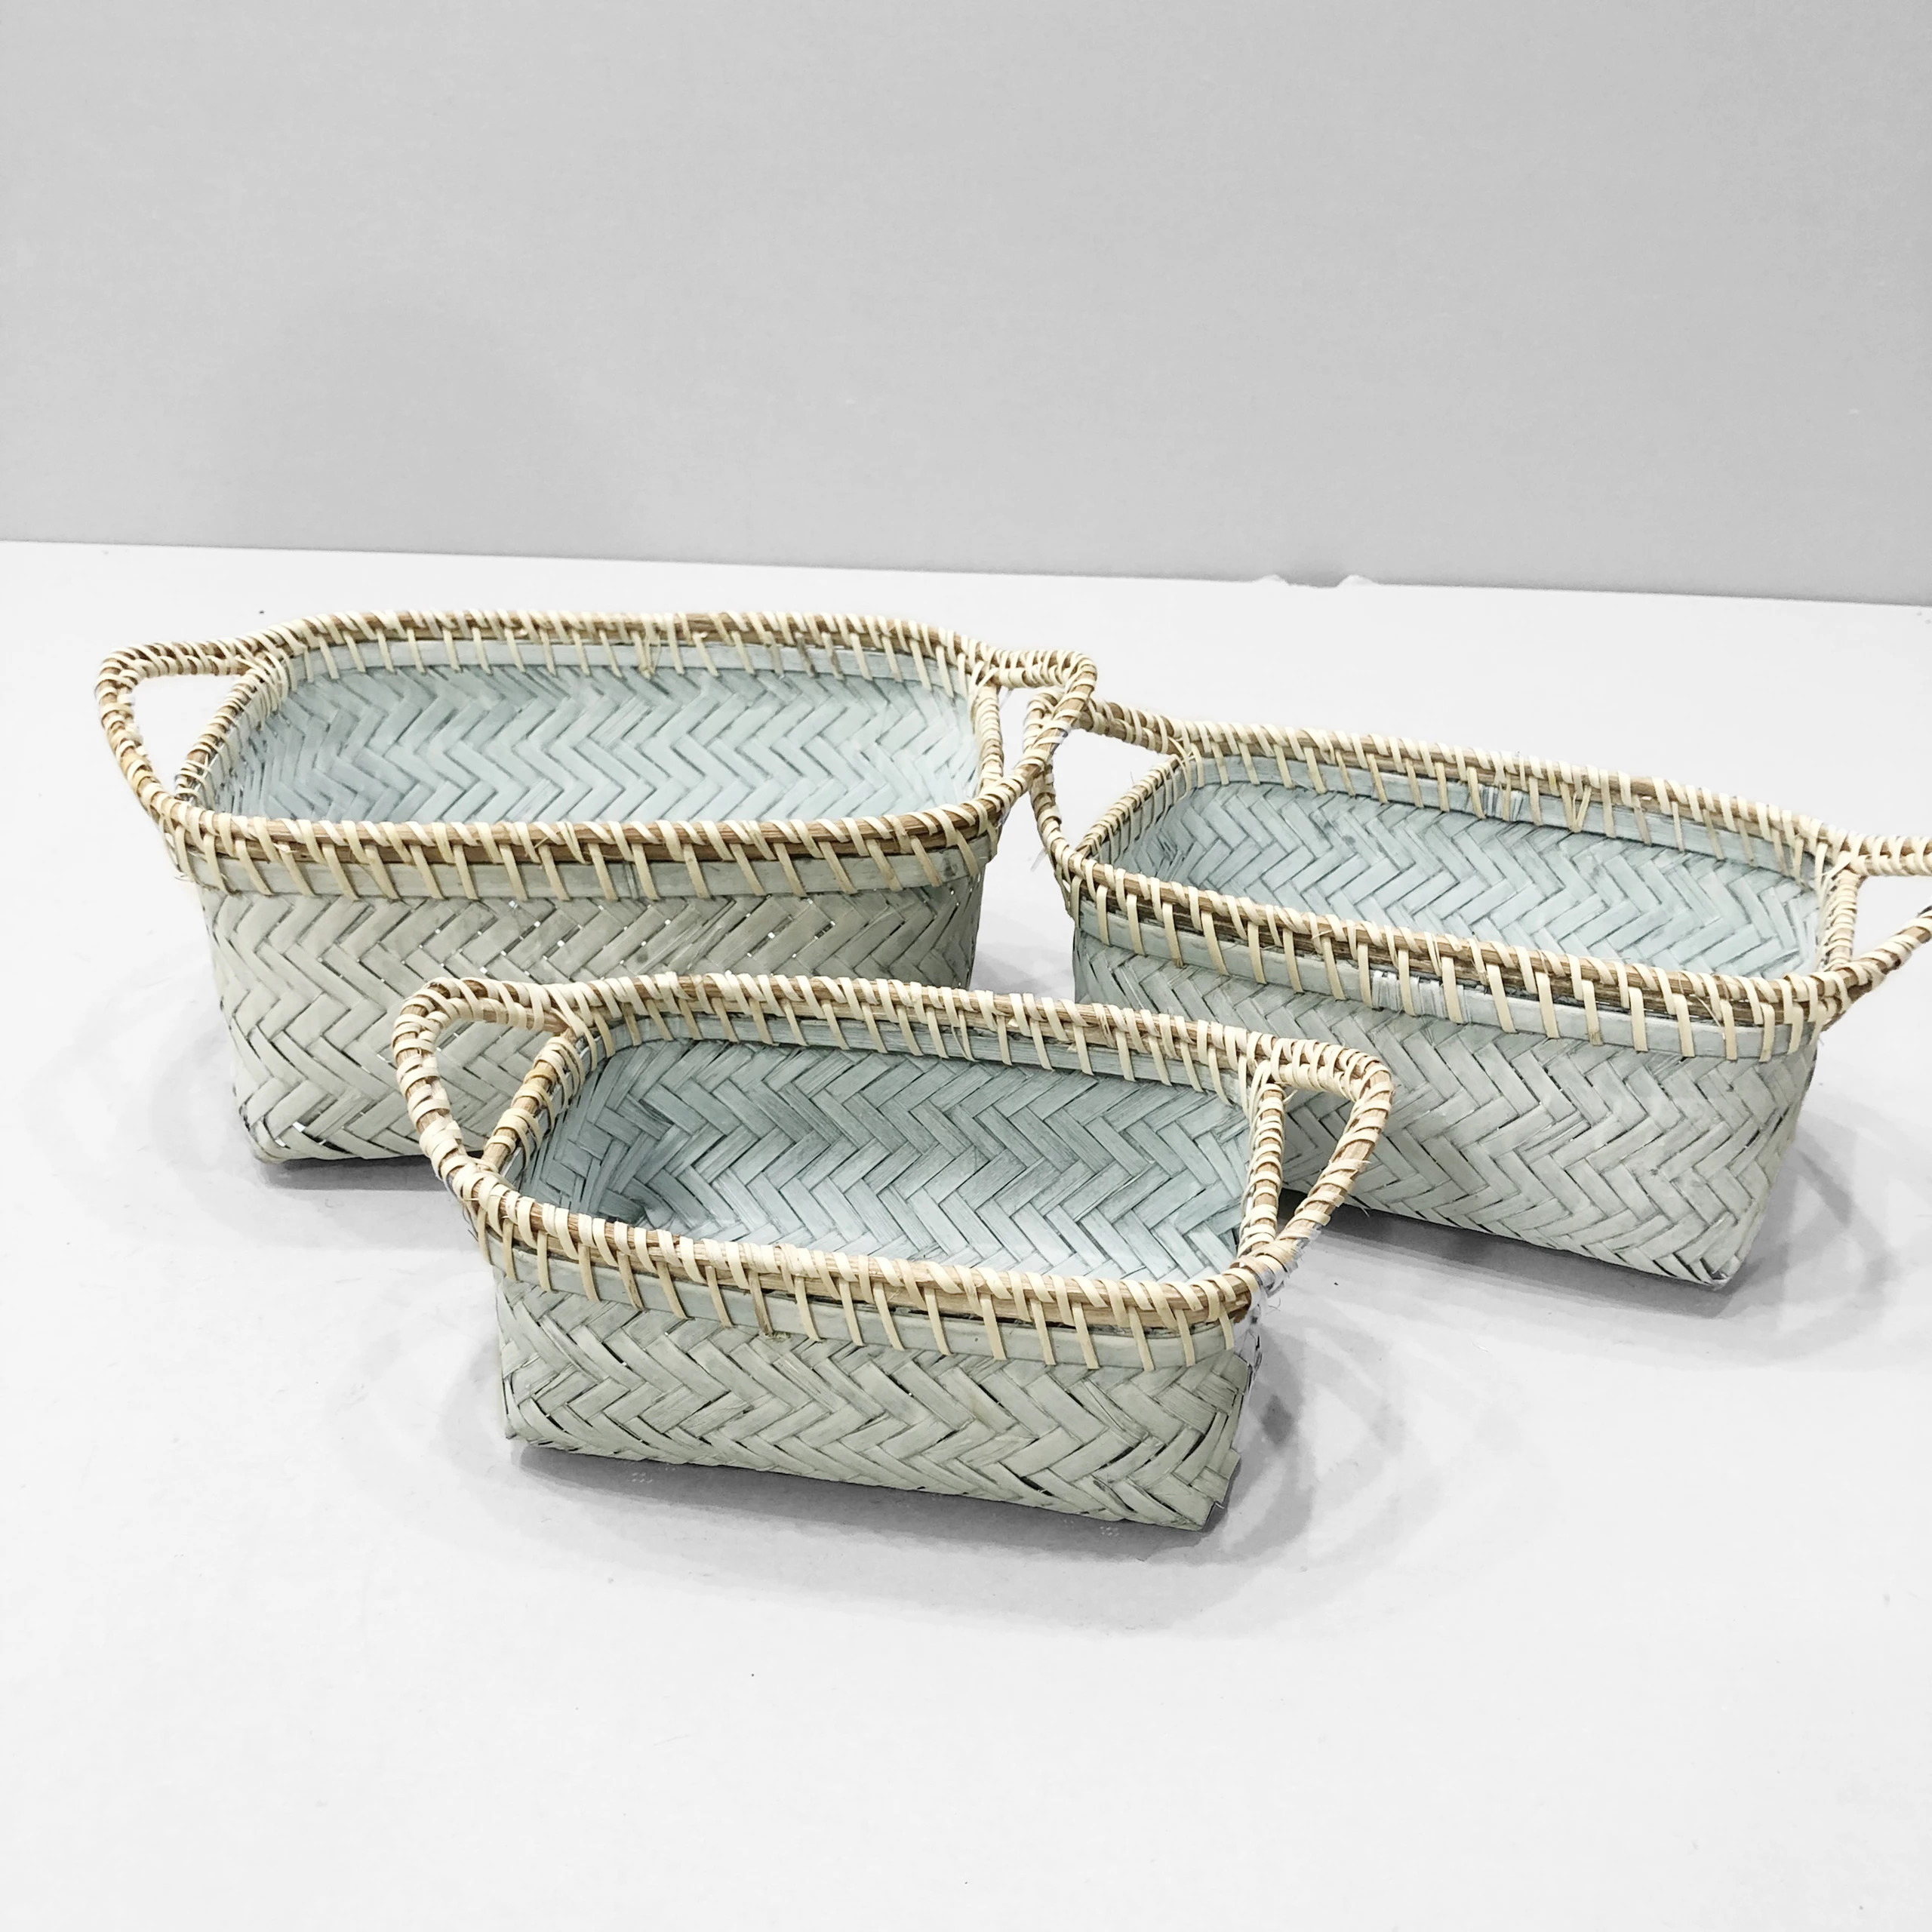 Set of 3 pieces Eco-friendly Handmade Bamboo Storage Basket Made in Vietnam Light grey color with handle